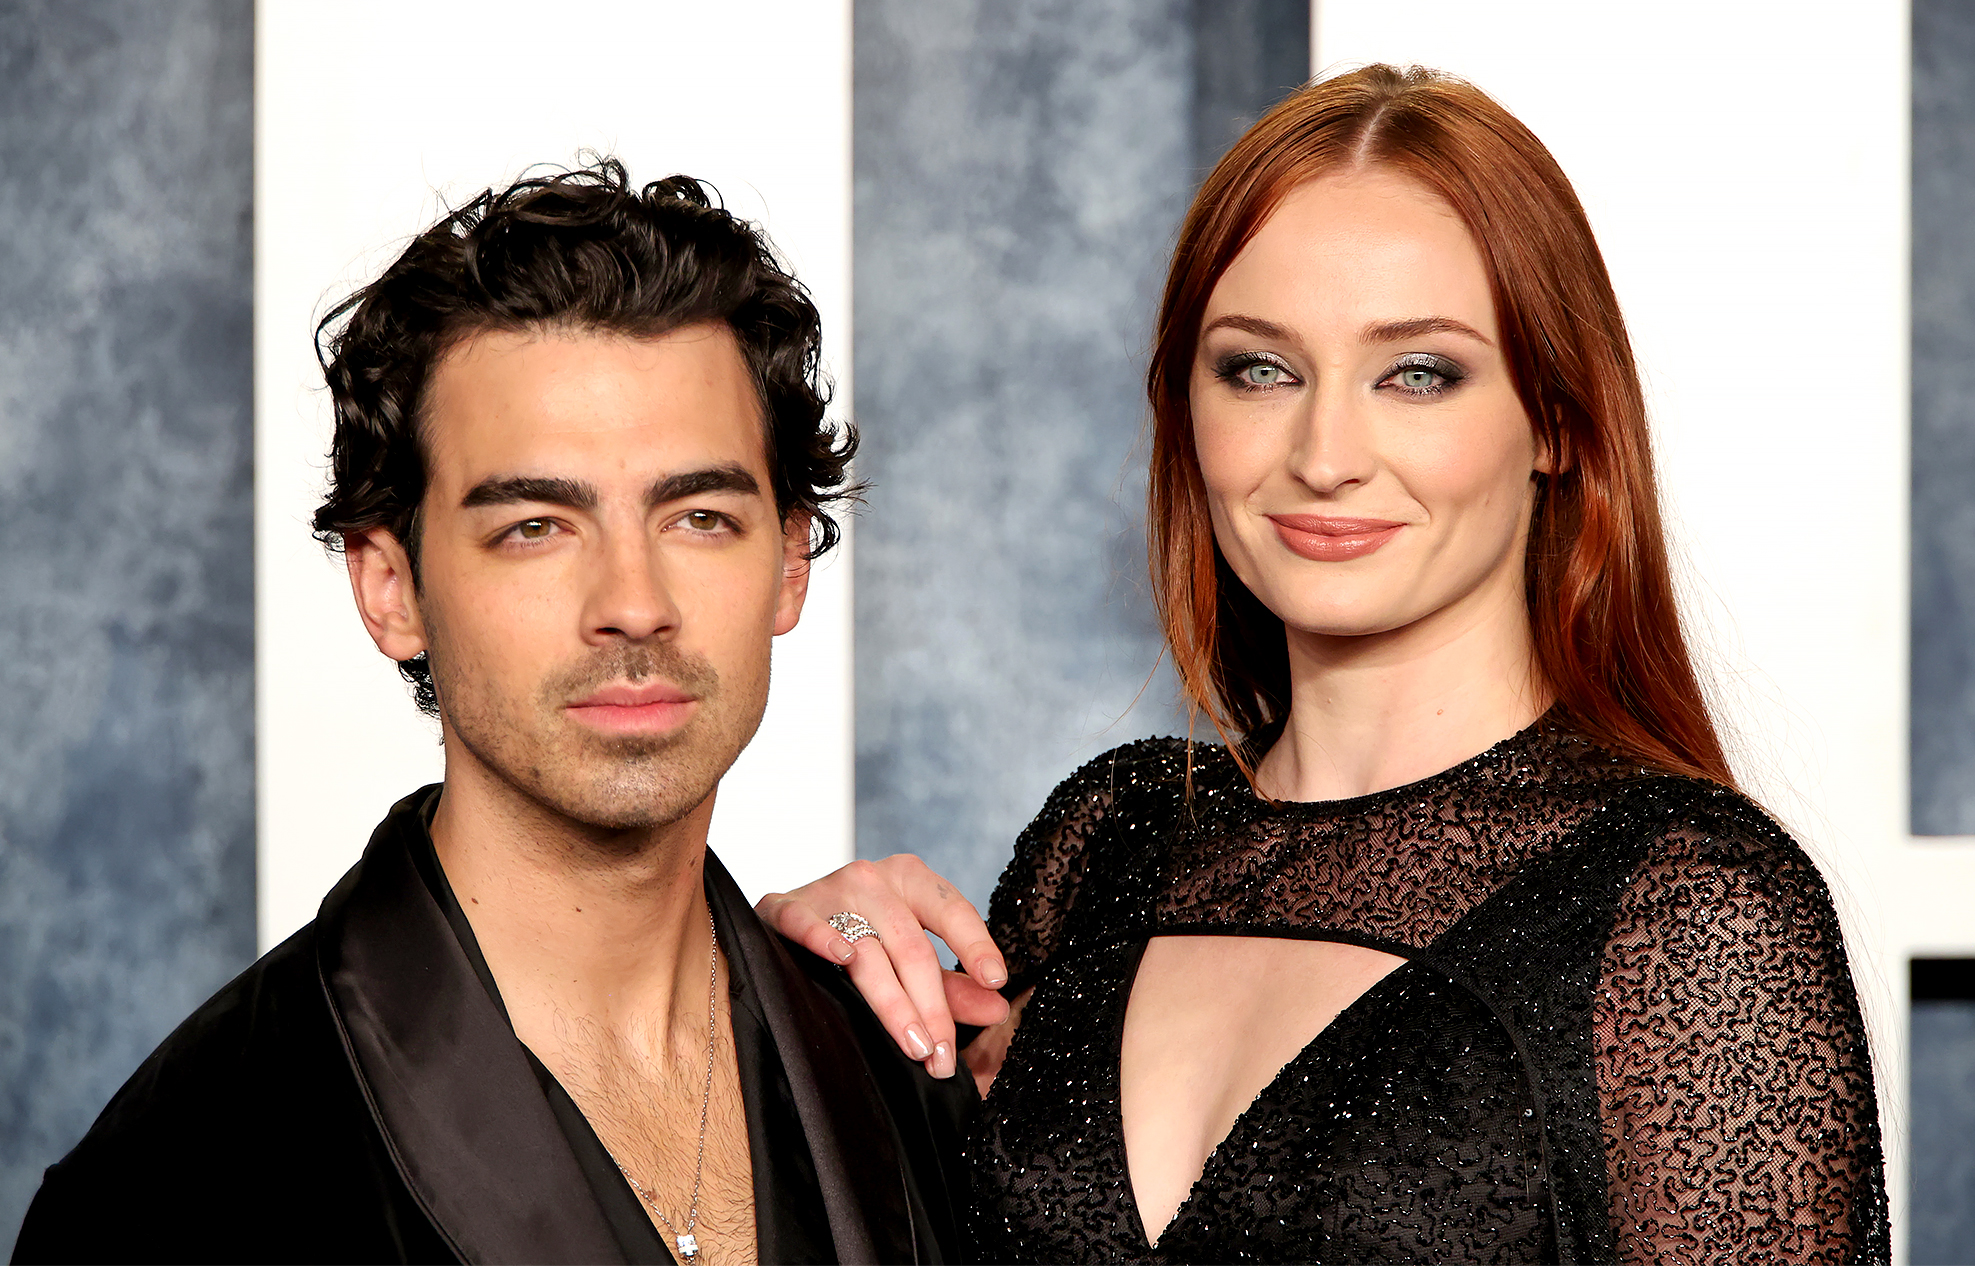 Joe Jonas files for divorce from Sophie Turner after 4 years of